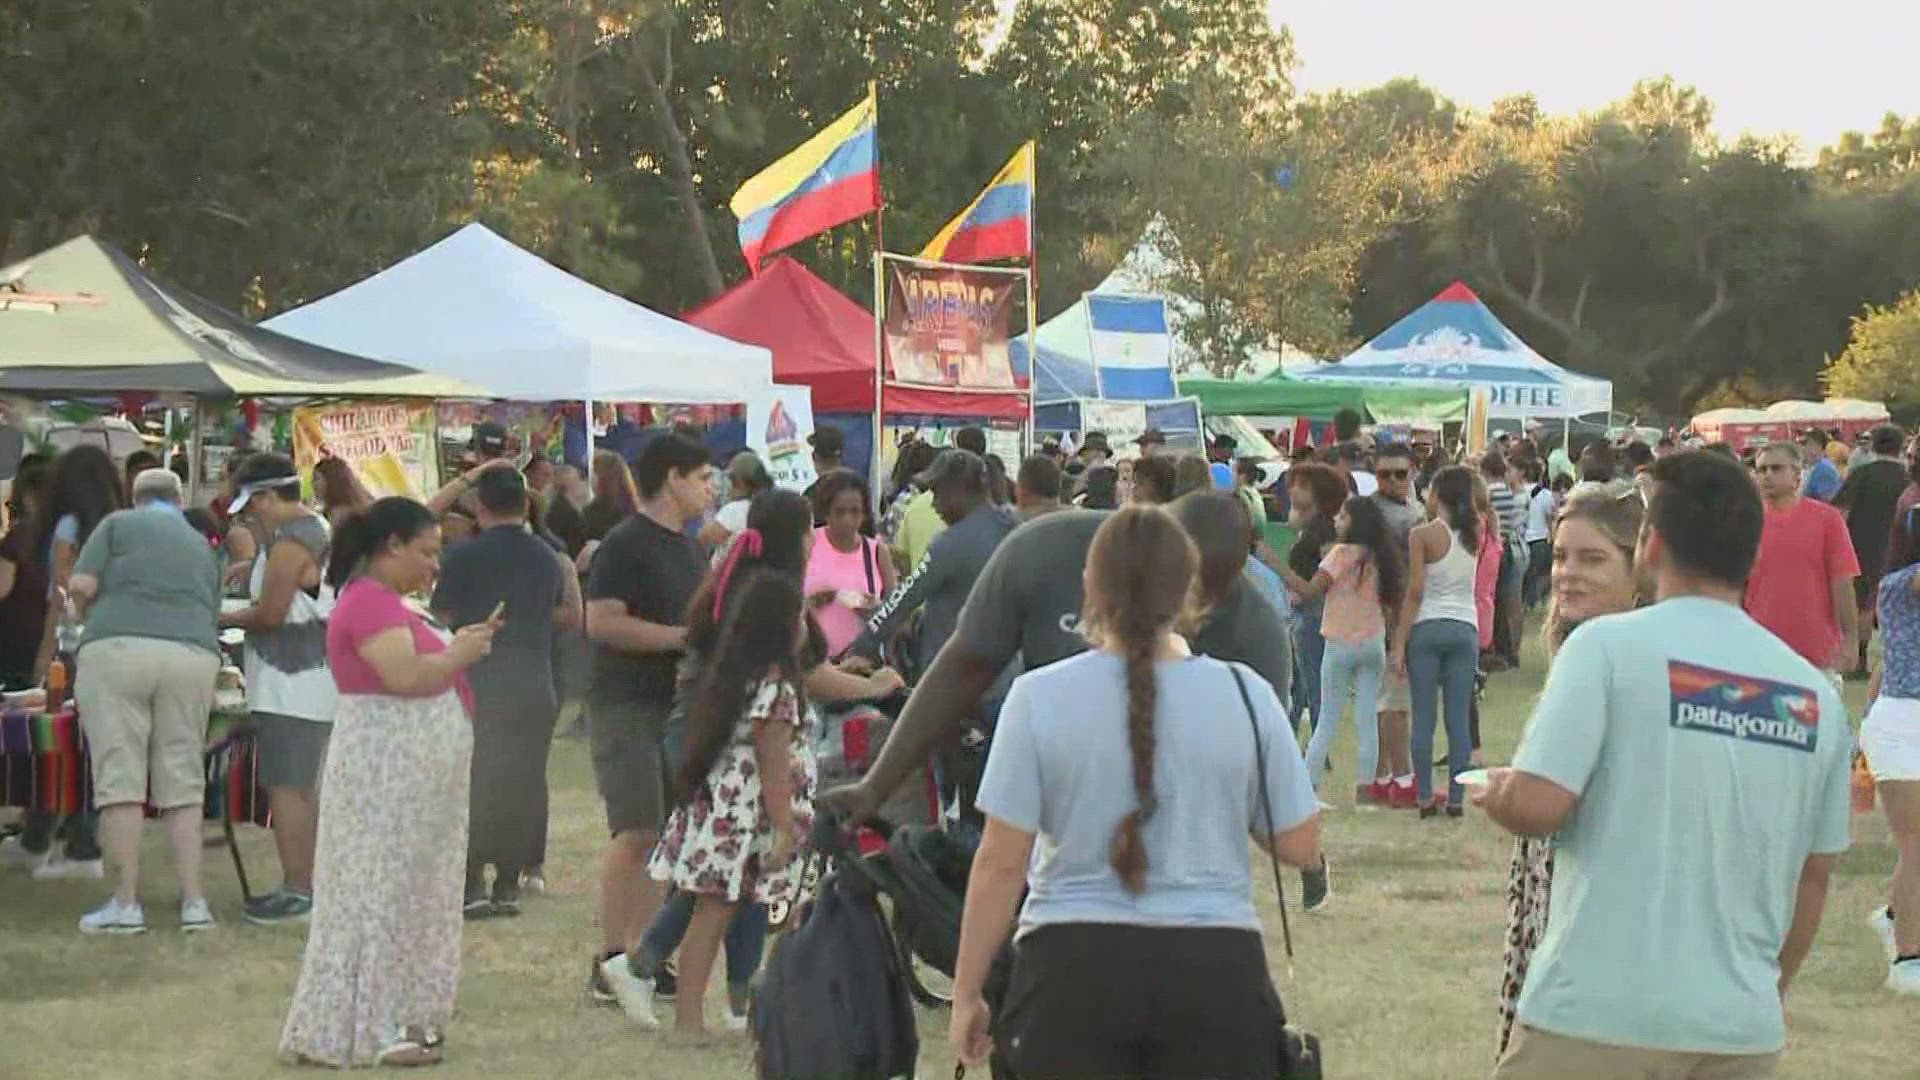 There are various festivals all across Louisiana to enjoy this weekend.